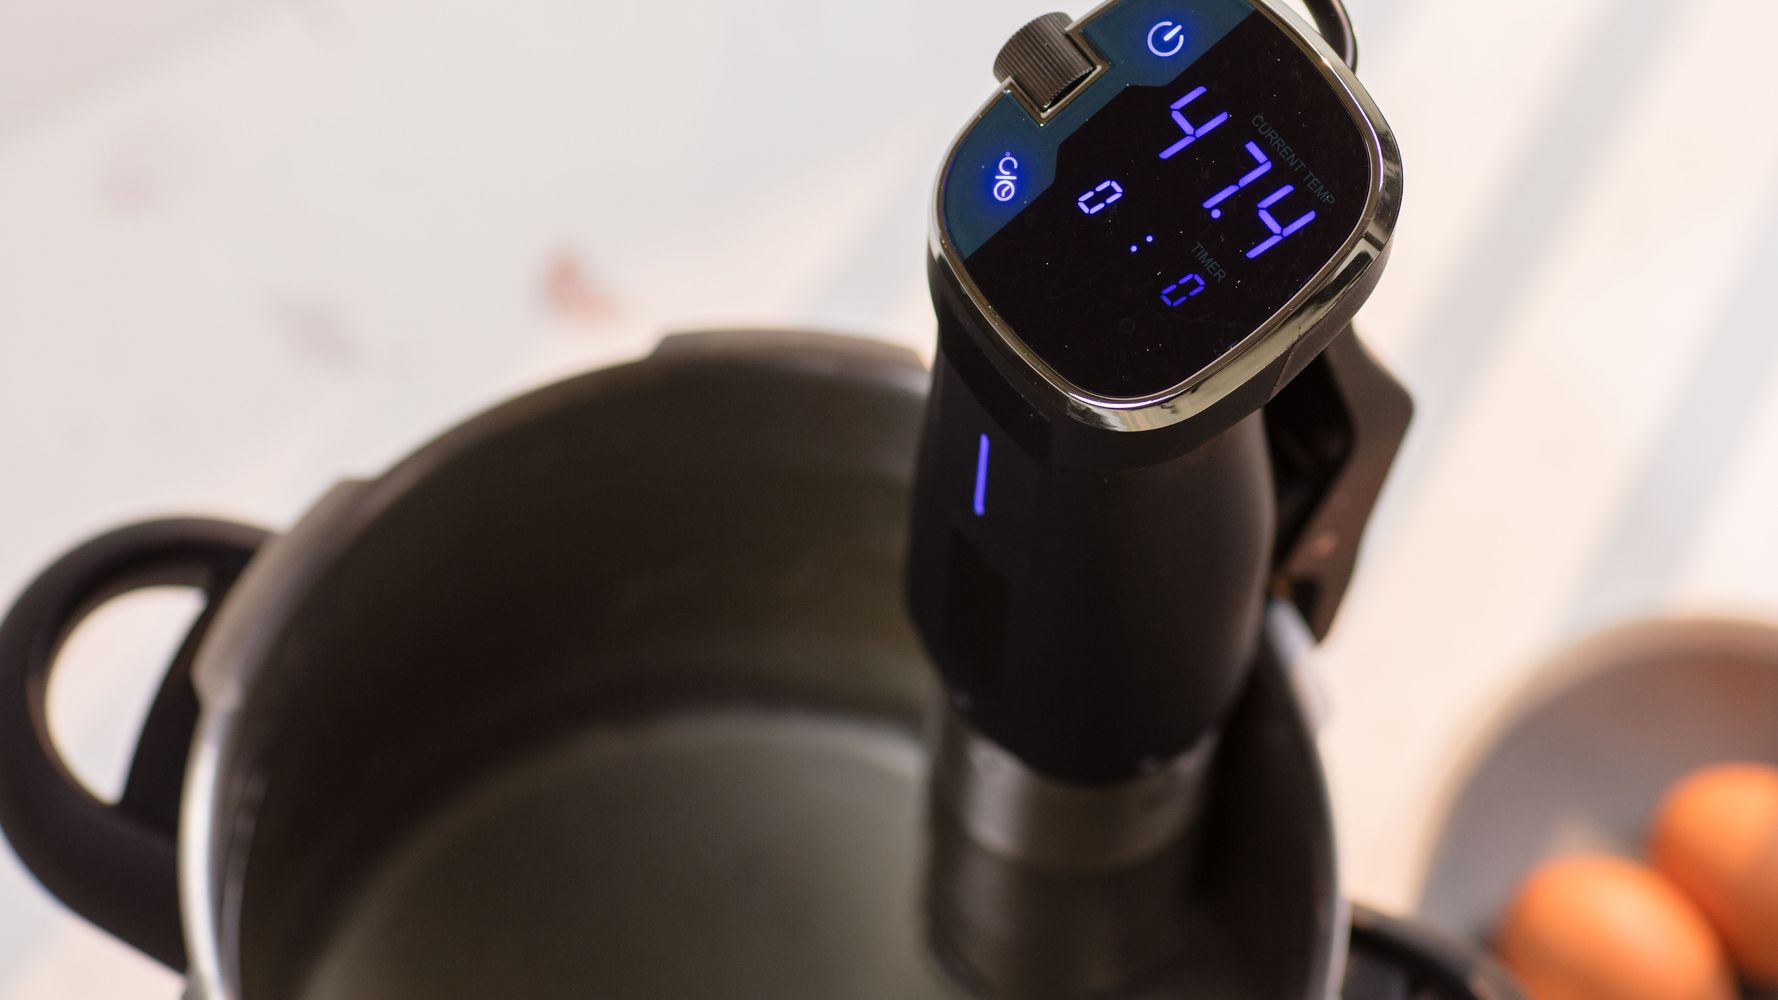 What equipment do you need to cook with the sous vide procedure